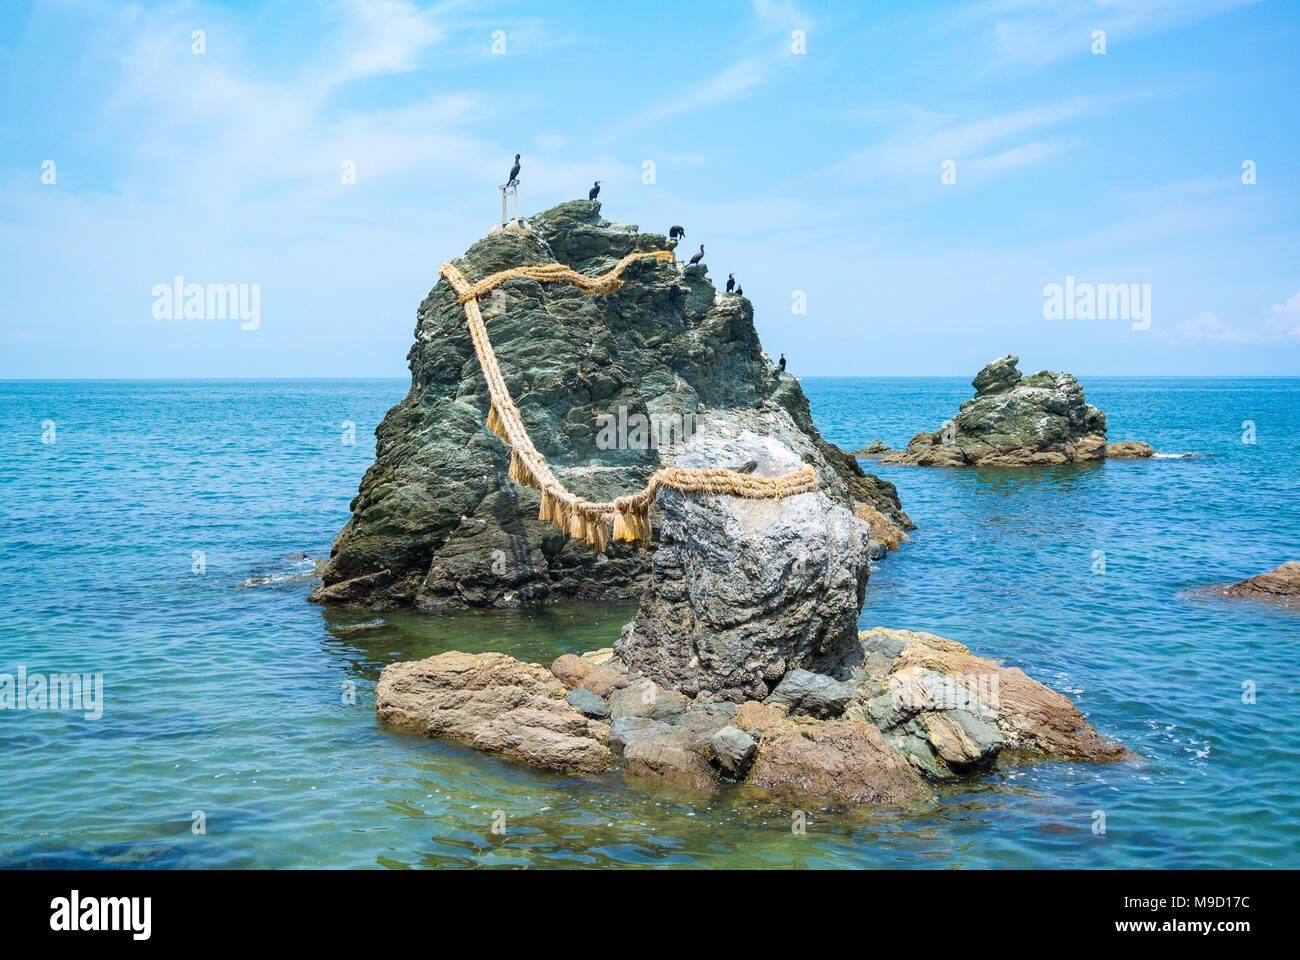 Meoto Iwa or the Loved one and loved one Rocks, iseshima, Mie prefecture, Japan Stock Photo